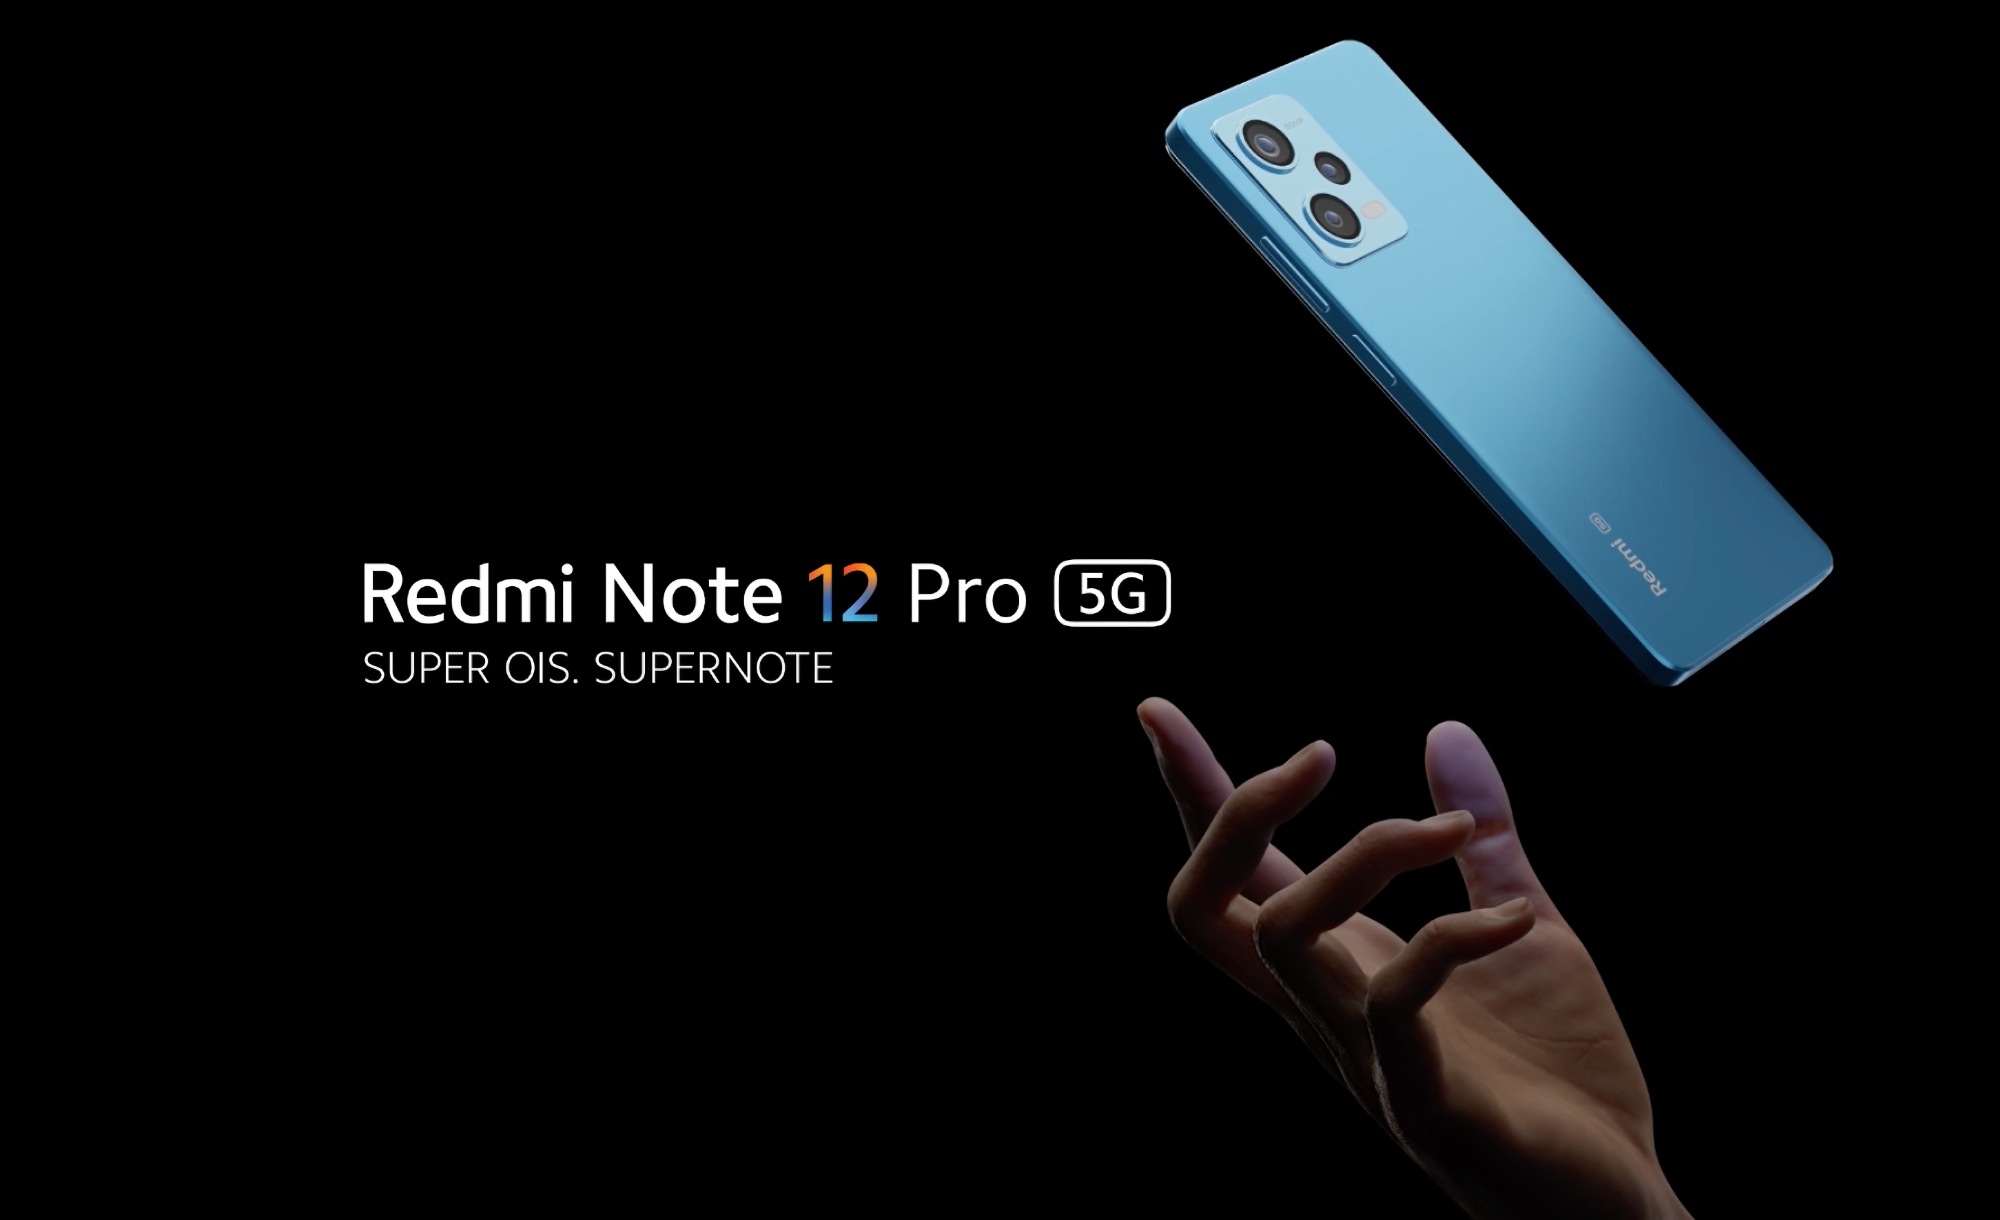 Redmi Note 12 Pro with MediaTek Dimensity 1080 chip, 50 MP Sony IMX766 camera and 67W fast charging unveiled outside of China